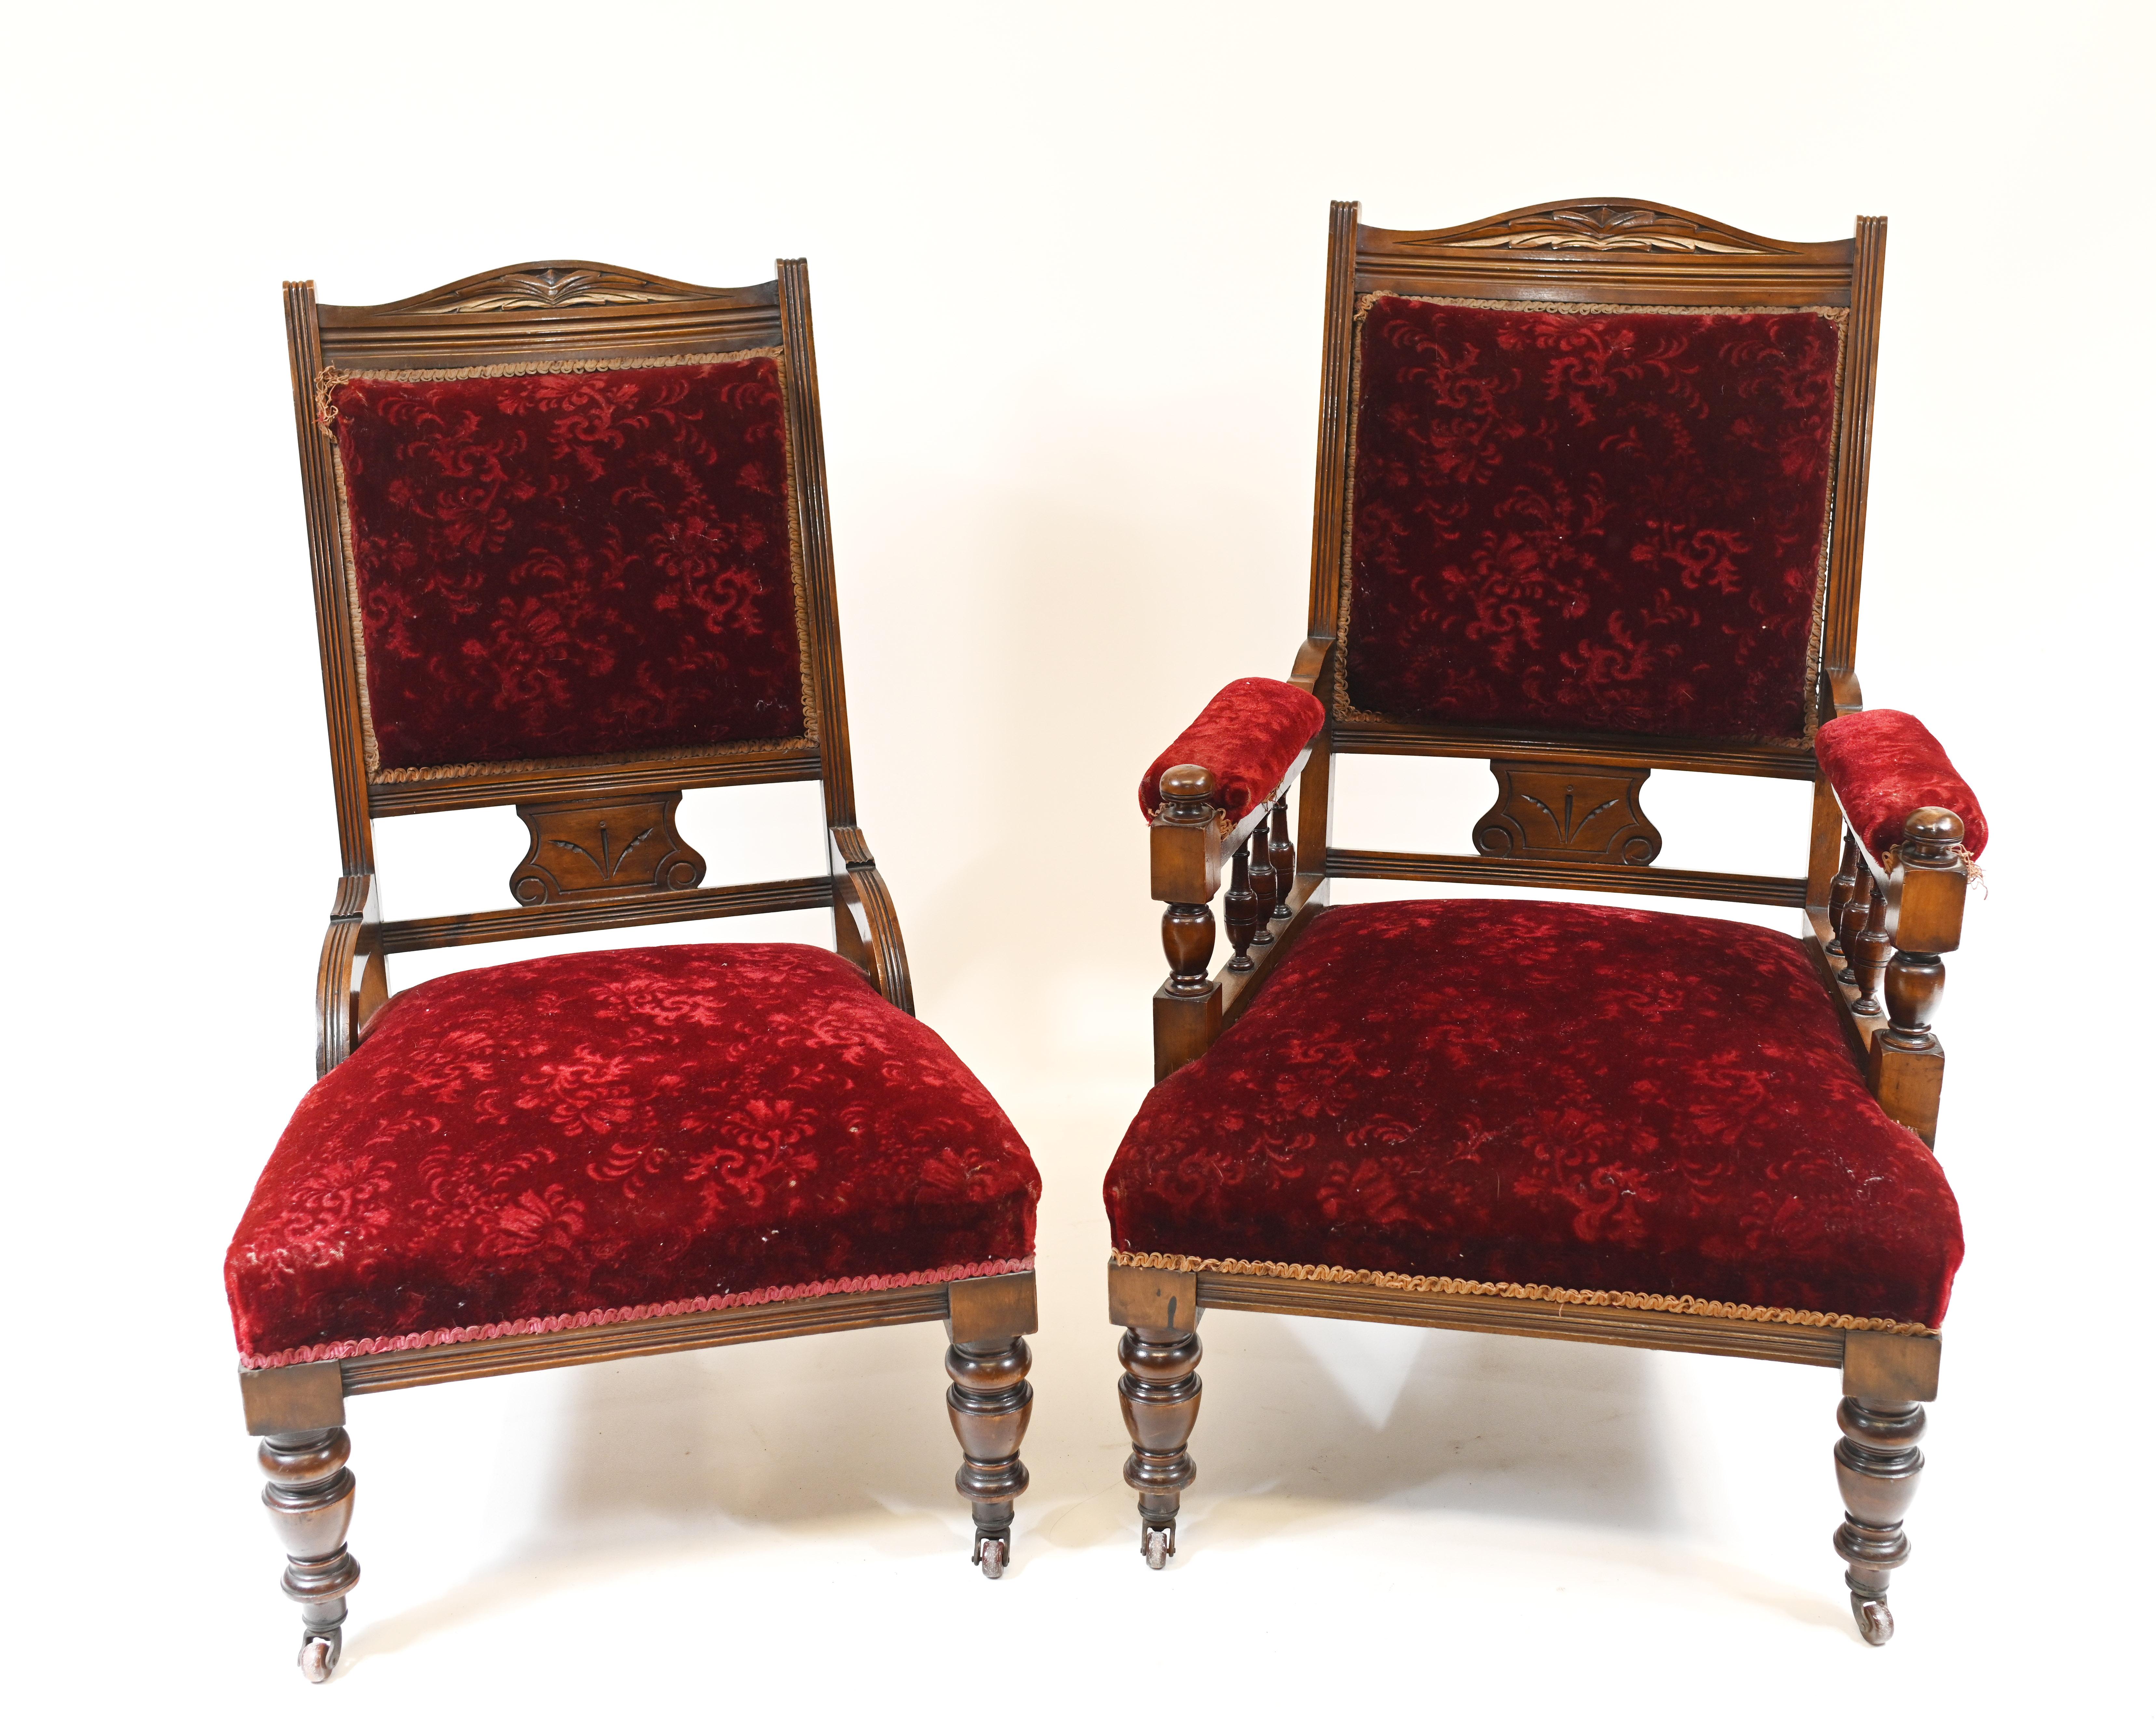 Gorgeous pair of Edwardian his and her chairs
Features and arm and a side chair
Frame hand carved from mahogany
Circa 1910
Offered in great shape ready for home use right away 
We ship to every corner of the planet.
  